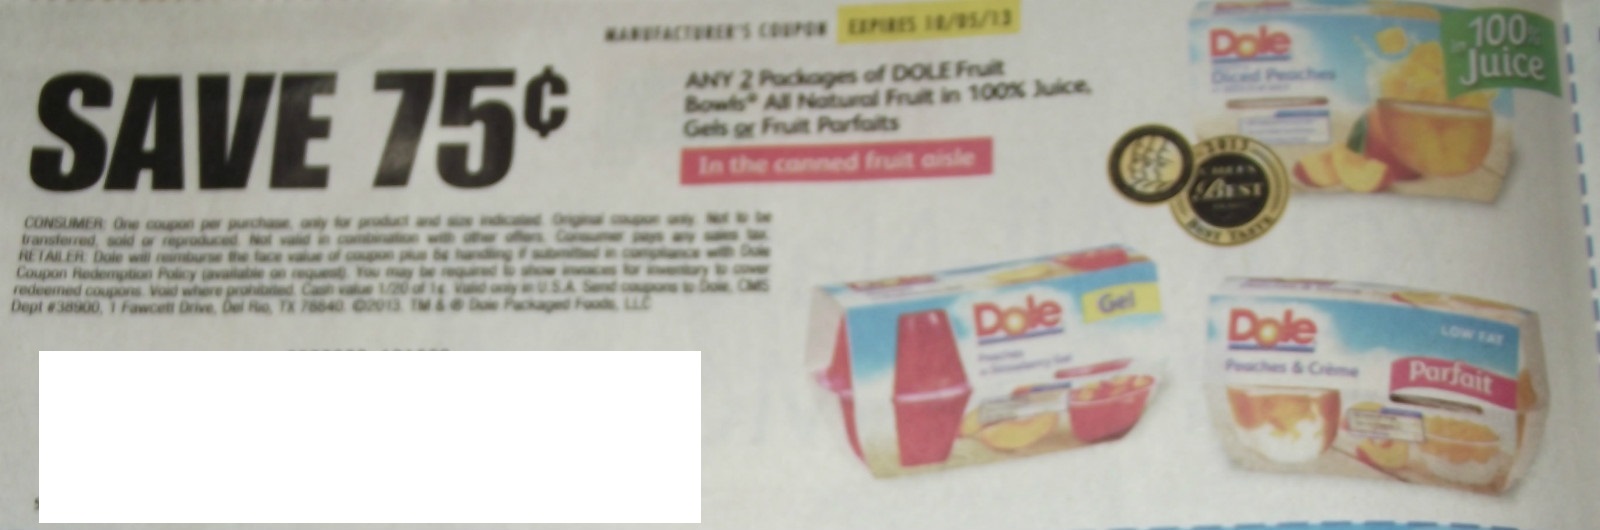 Save $0.75 any 2 packages of Dole Fruit Bowls all natural fruit in 100% juice, Gels or Fruit Parfaits Expires 10/05/2013